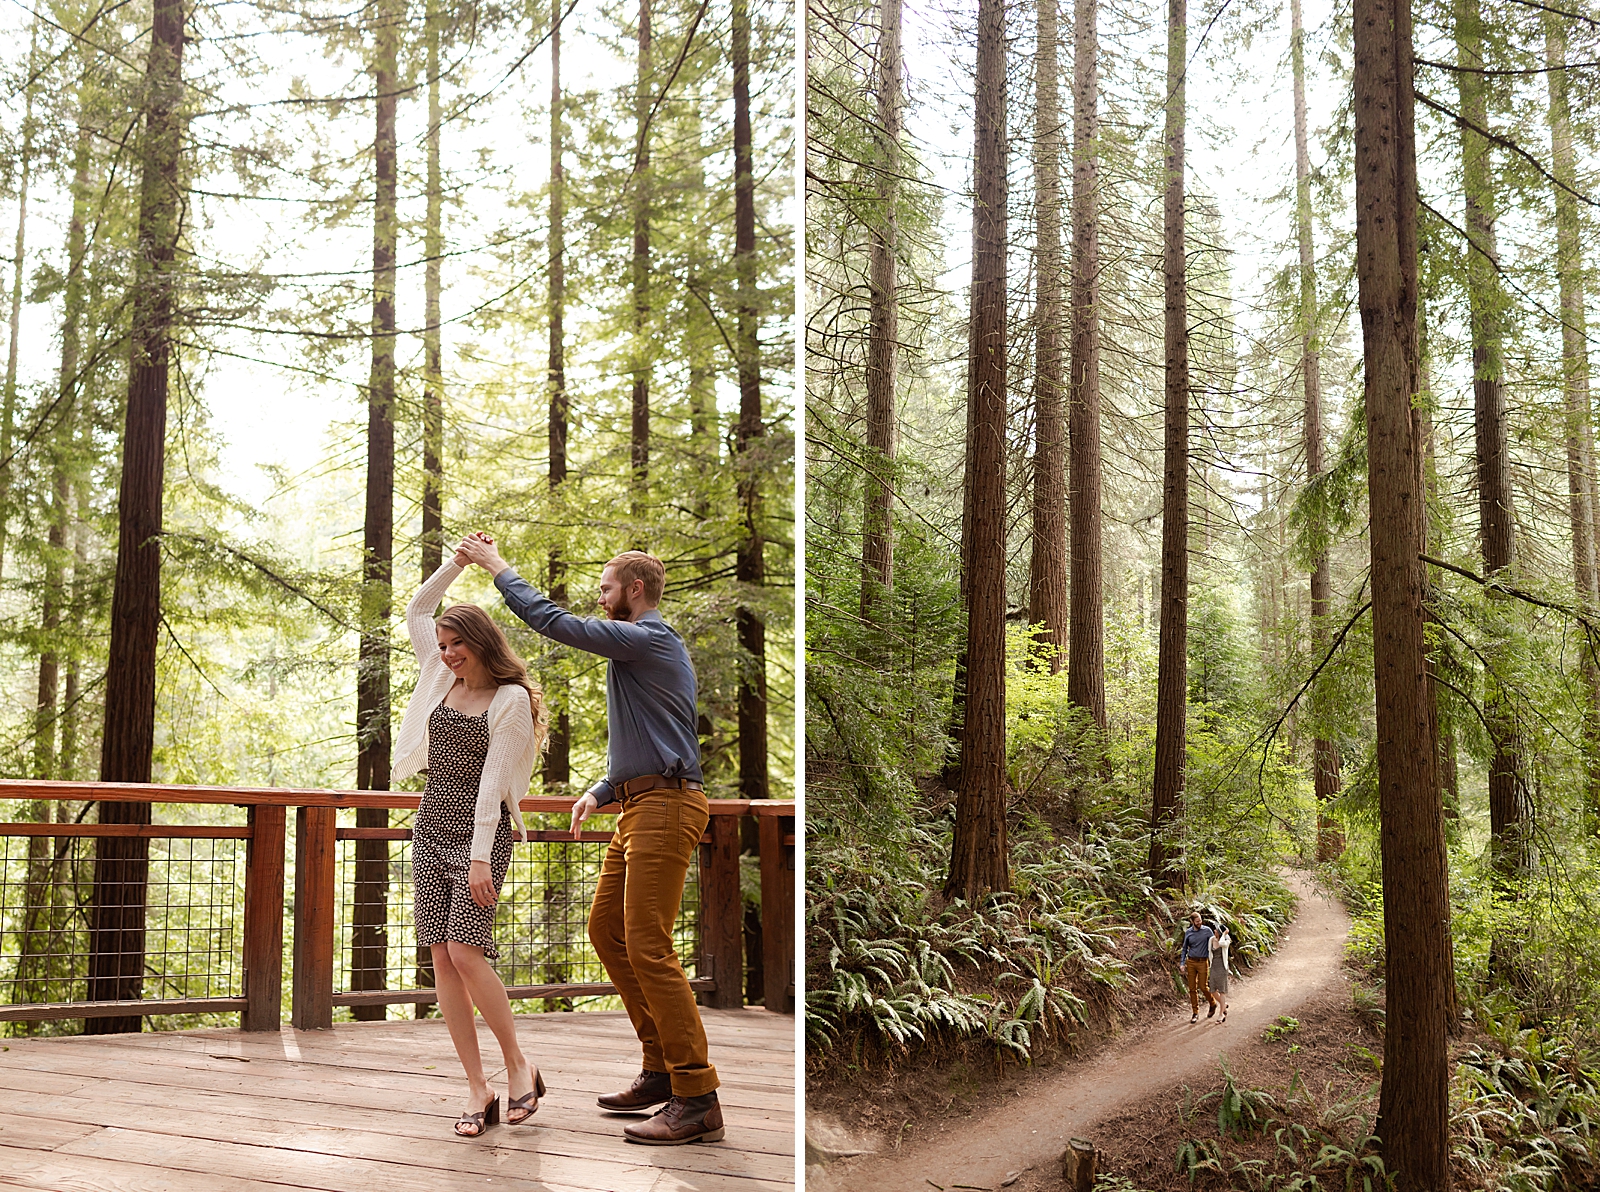 Couple twirling and walking through forrest